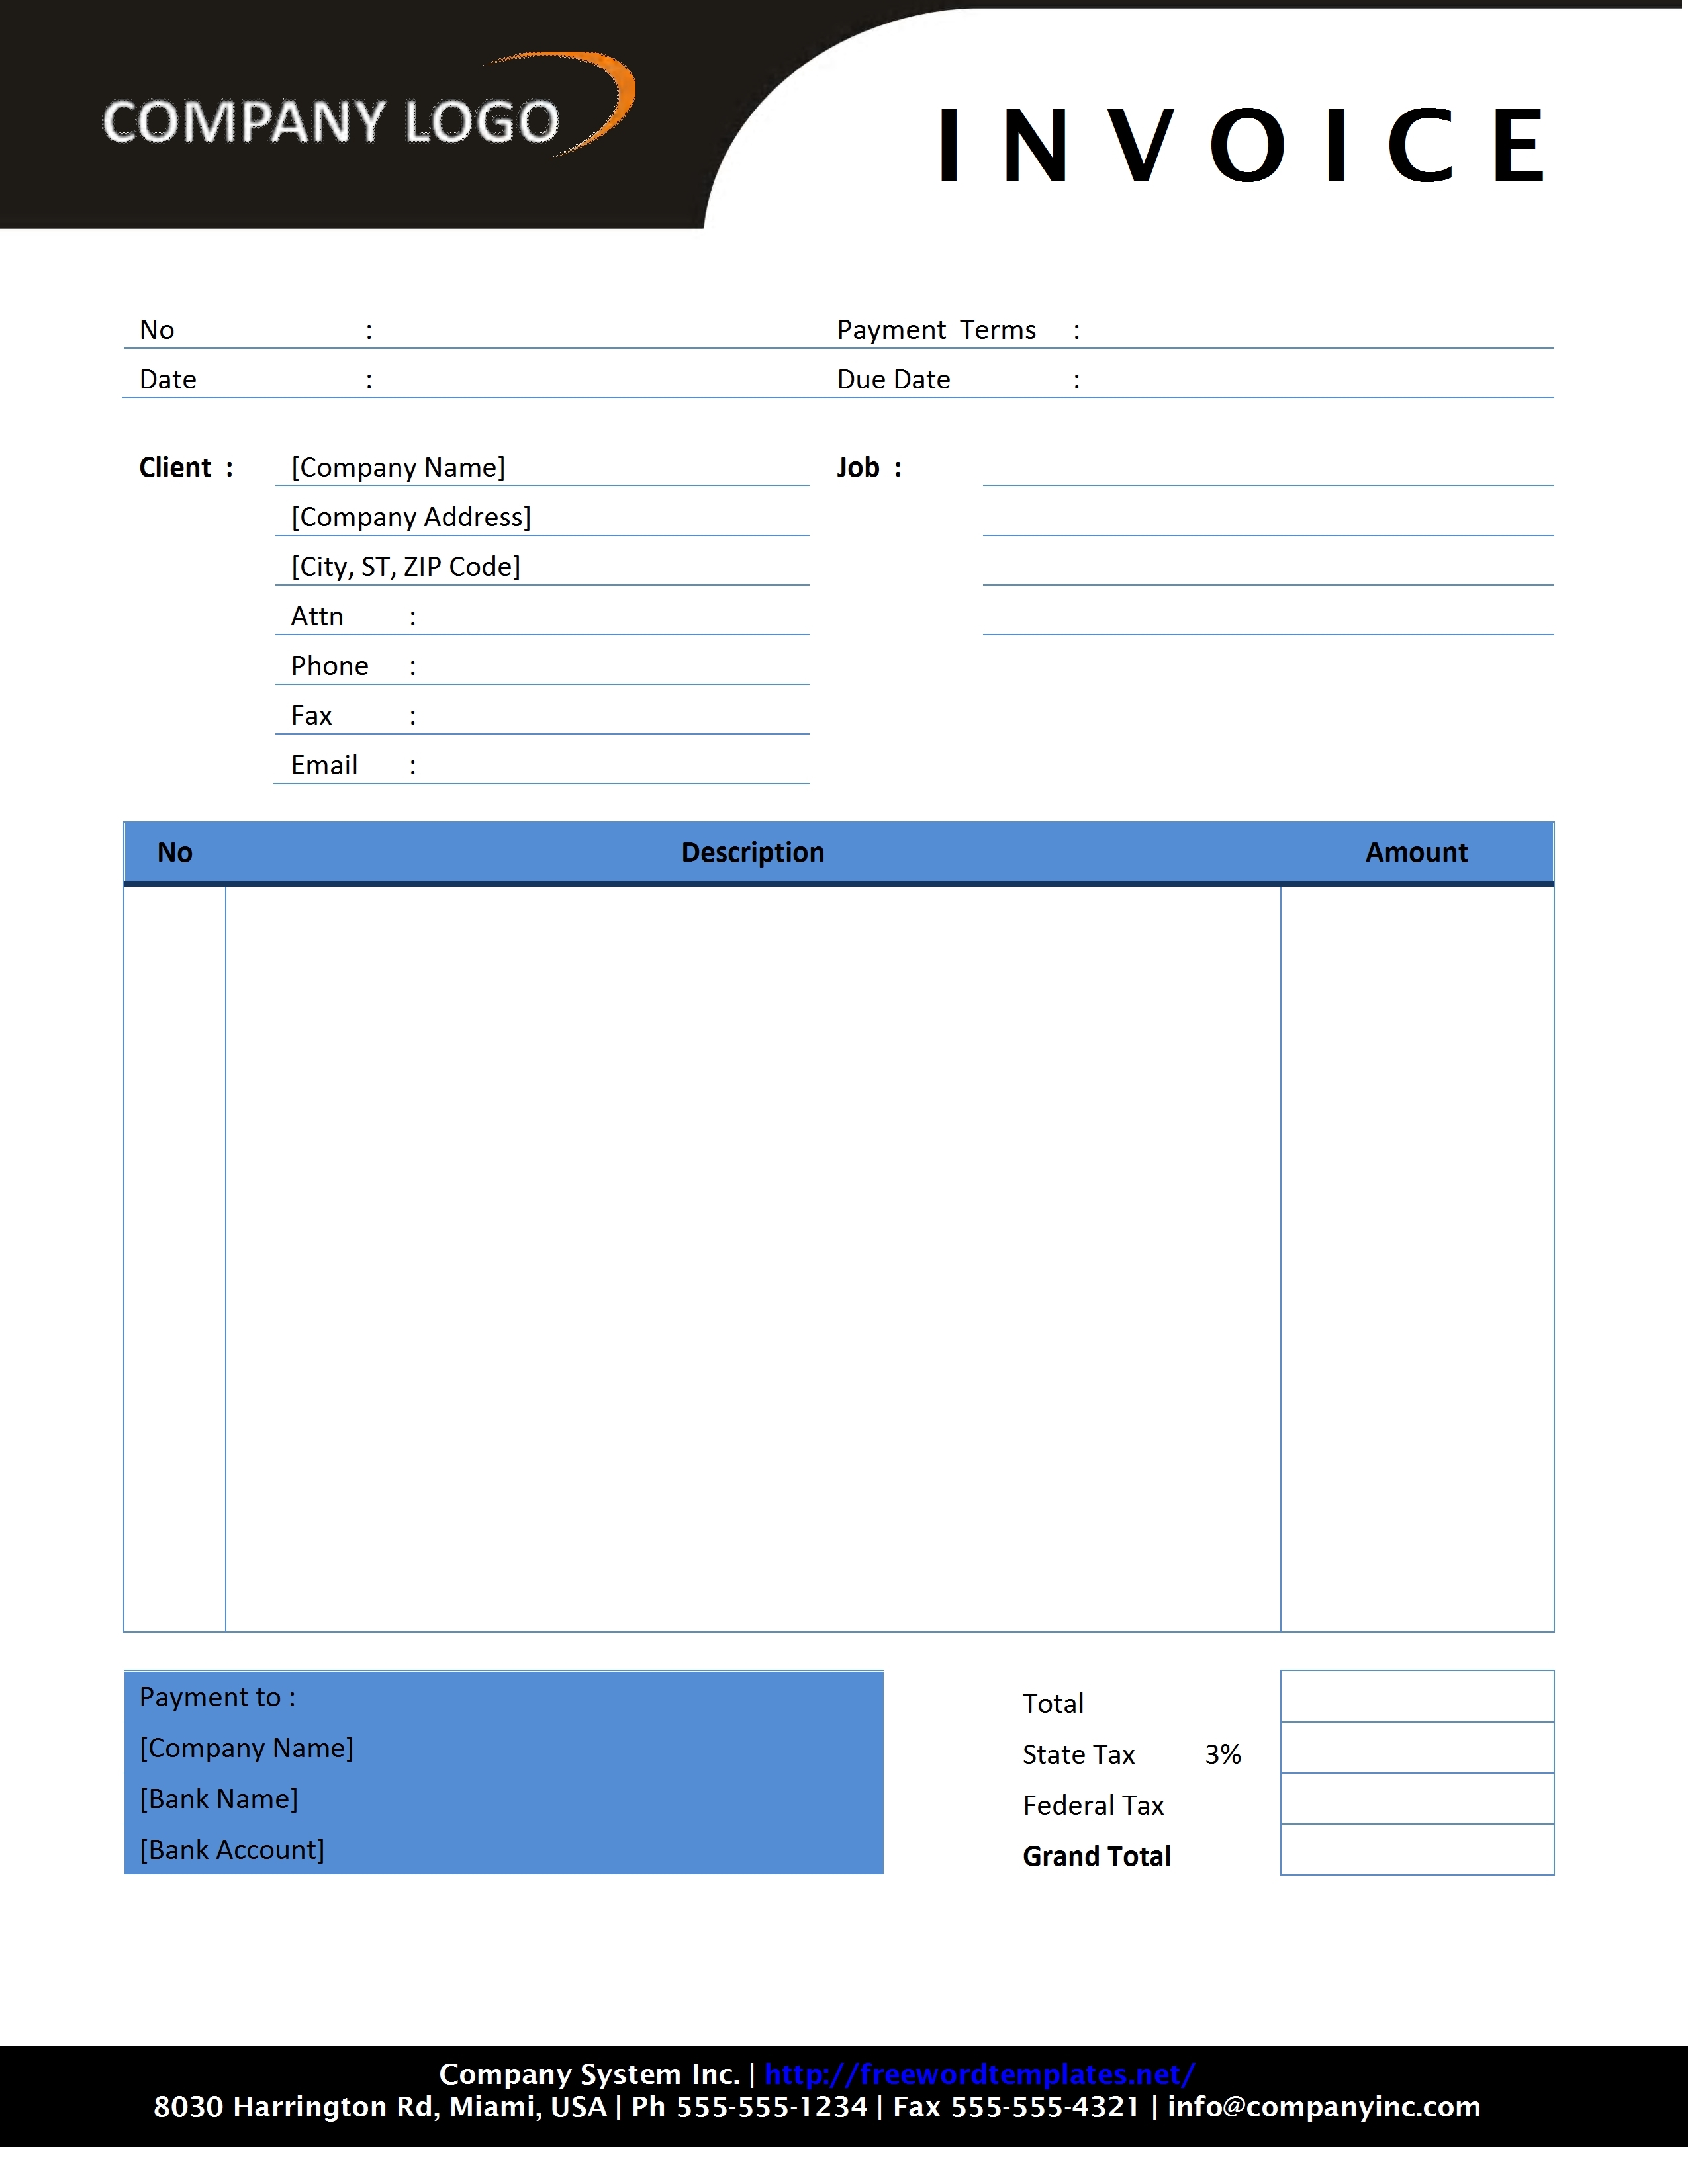 microsoft word invoice template download best business template invoice template in word